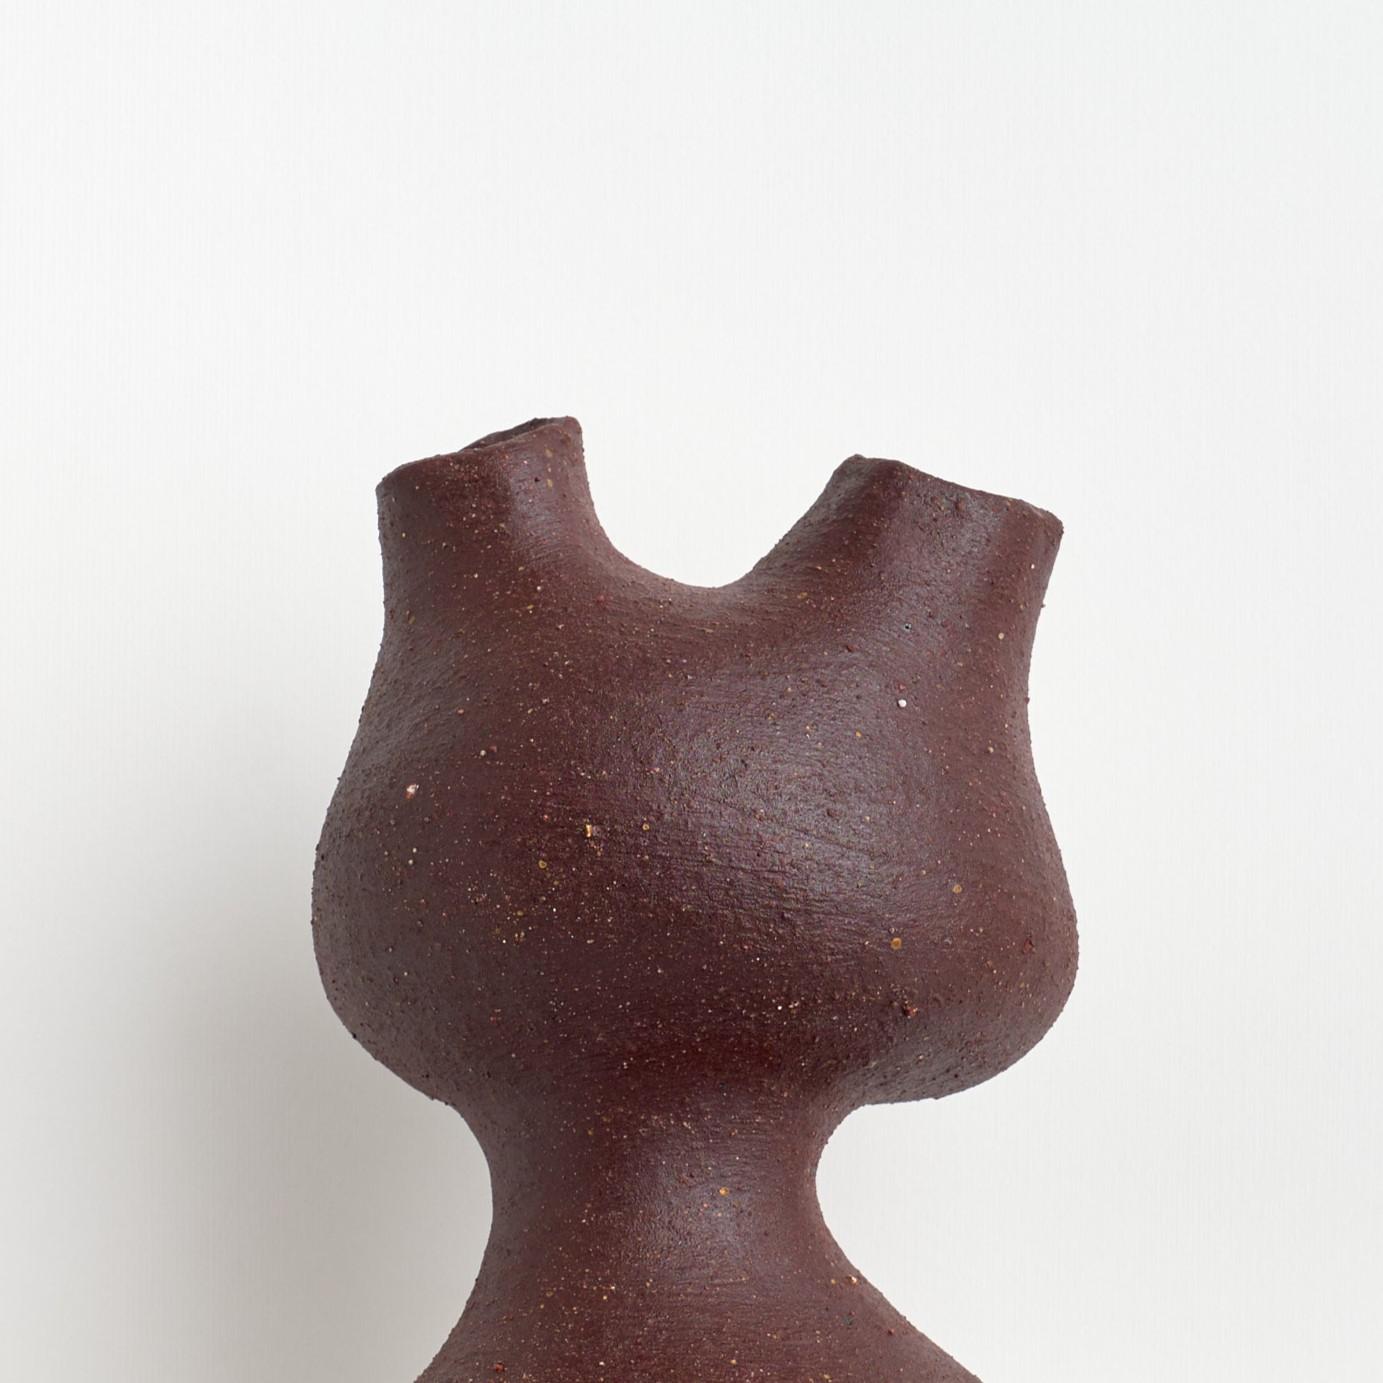 Complemento Vase by Camila Apaez
Unique
Materials: Stoneware
Dimensions: ⌀ 17 x H 27 cm


Ila Ceramica emerged from a process of inner inquiry where ceramics became a space for presence, silence, touch and patience. Camila discovered the shapes that